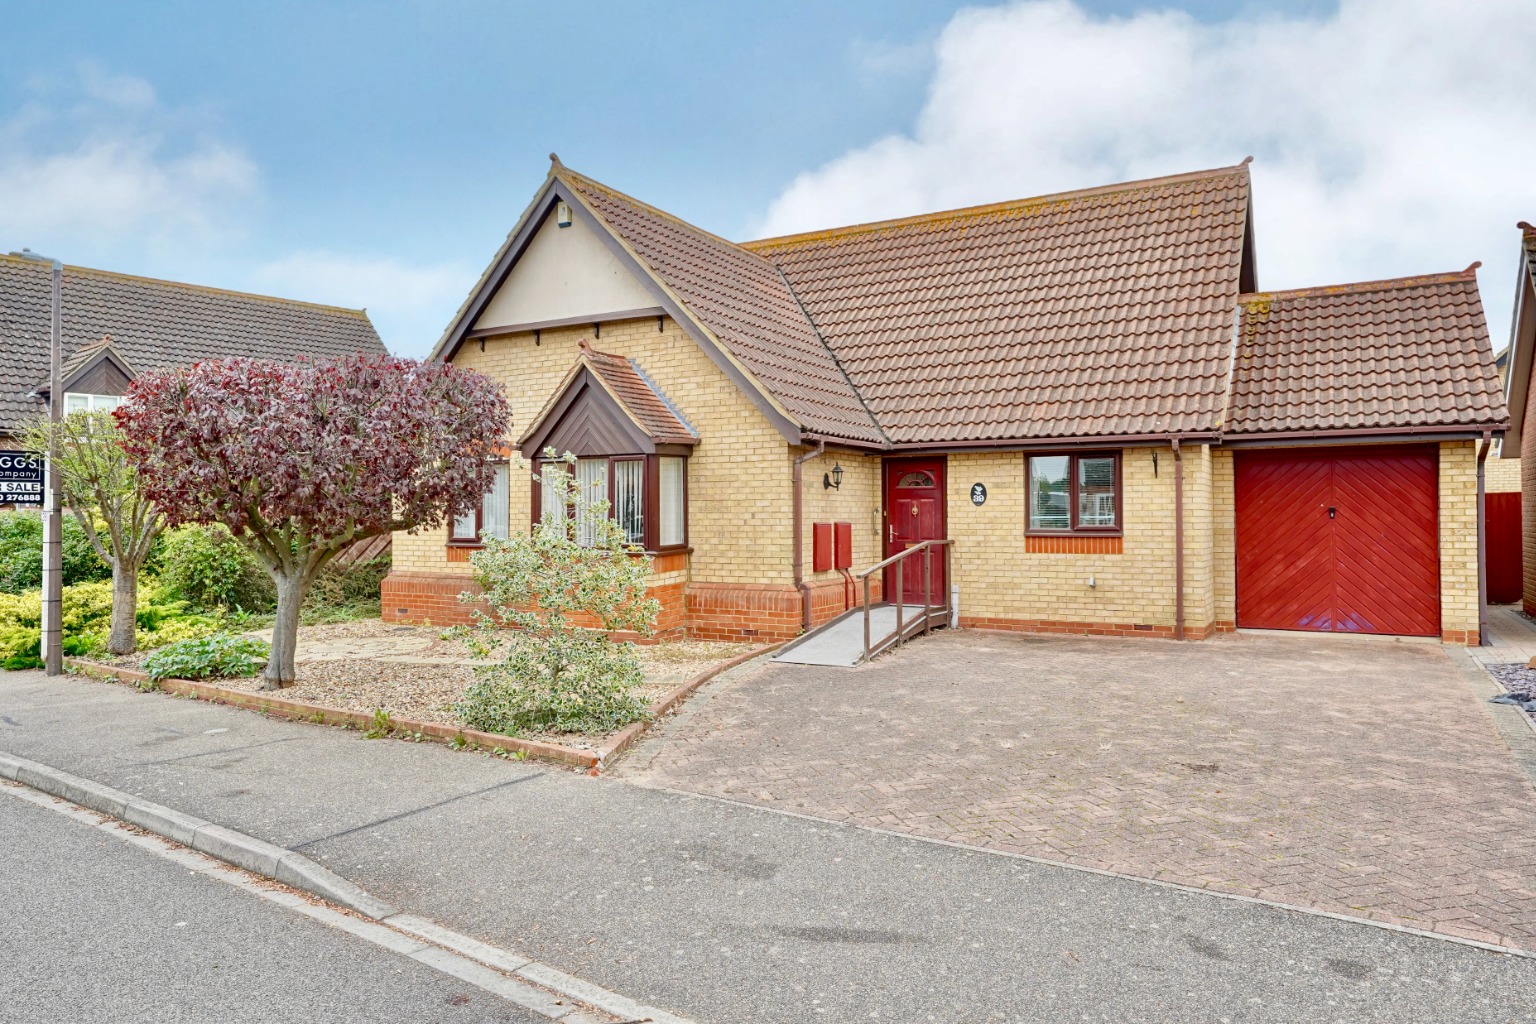 We’re very pleased to be offering for sale this spacious three bedroom, detached bungalow.